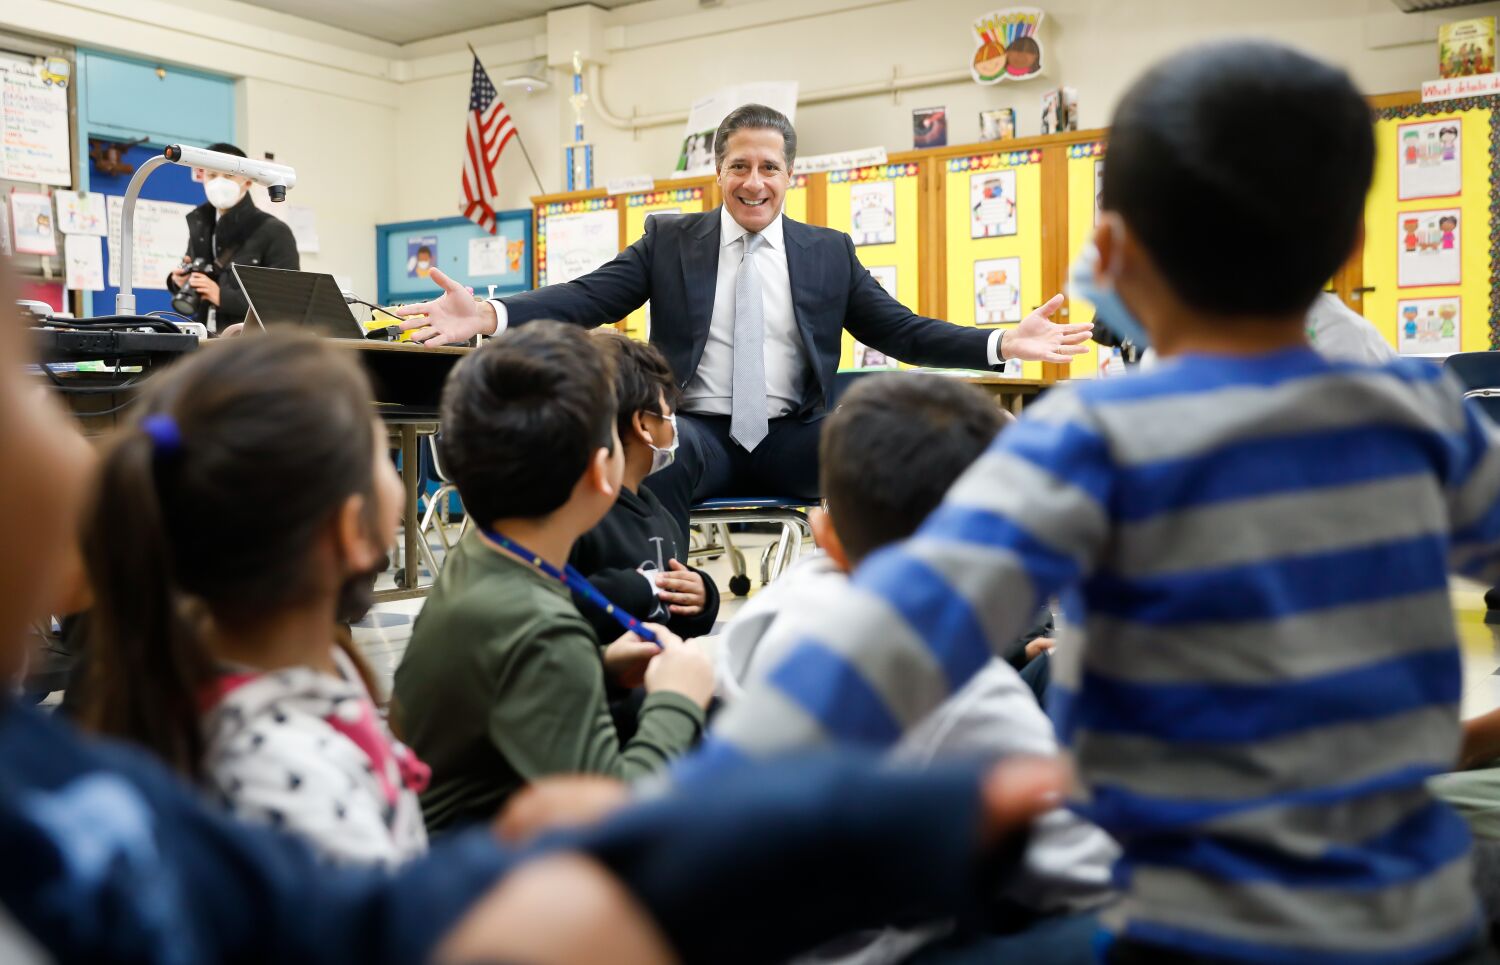 He's bold, camera ready and loves Twitter, but has L.A.'s schools chief uplifted students?